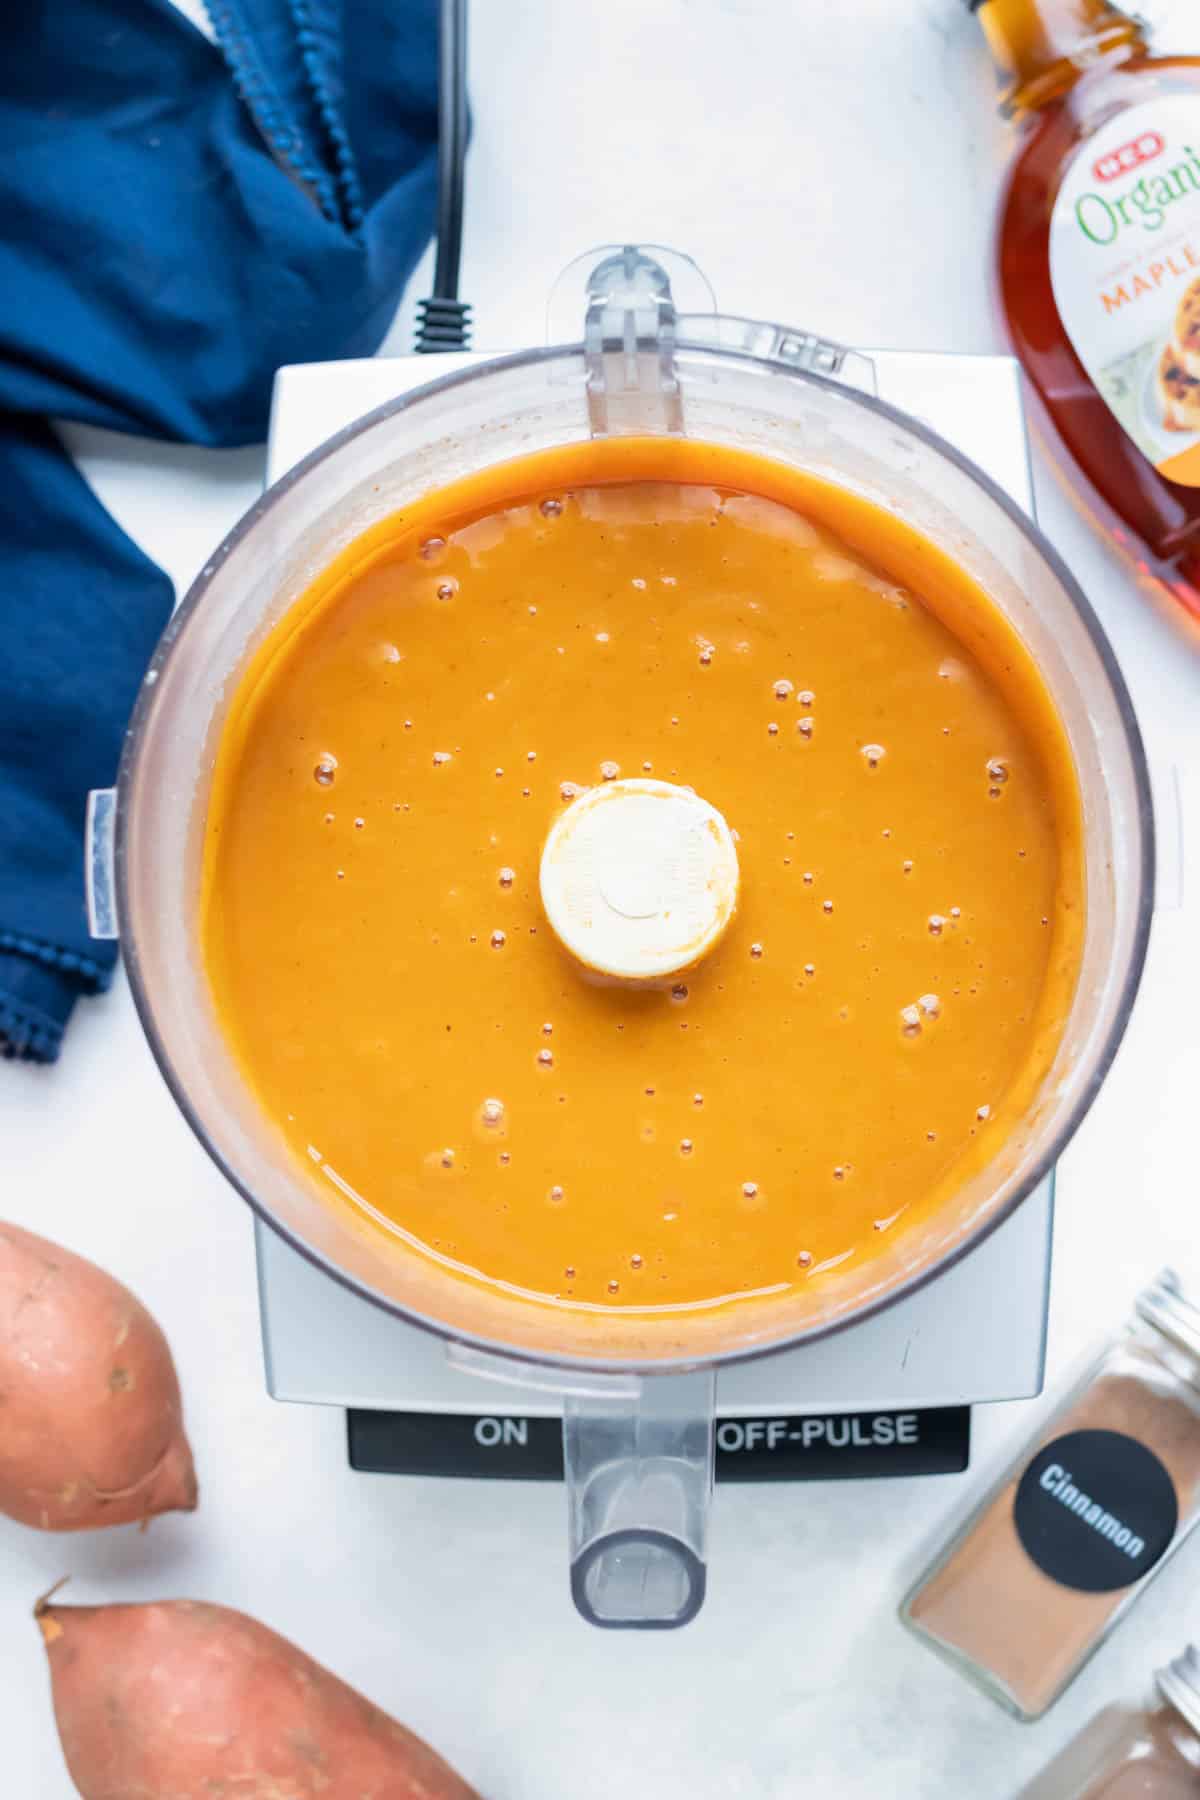 Ingredients are pureed together in a food mixer for a creamy sweet potato pie filling.